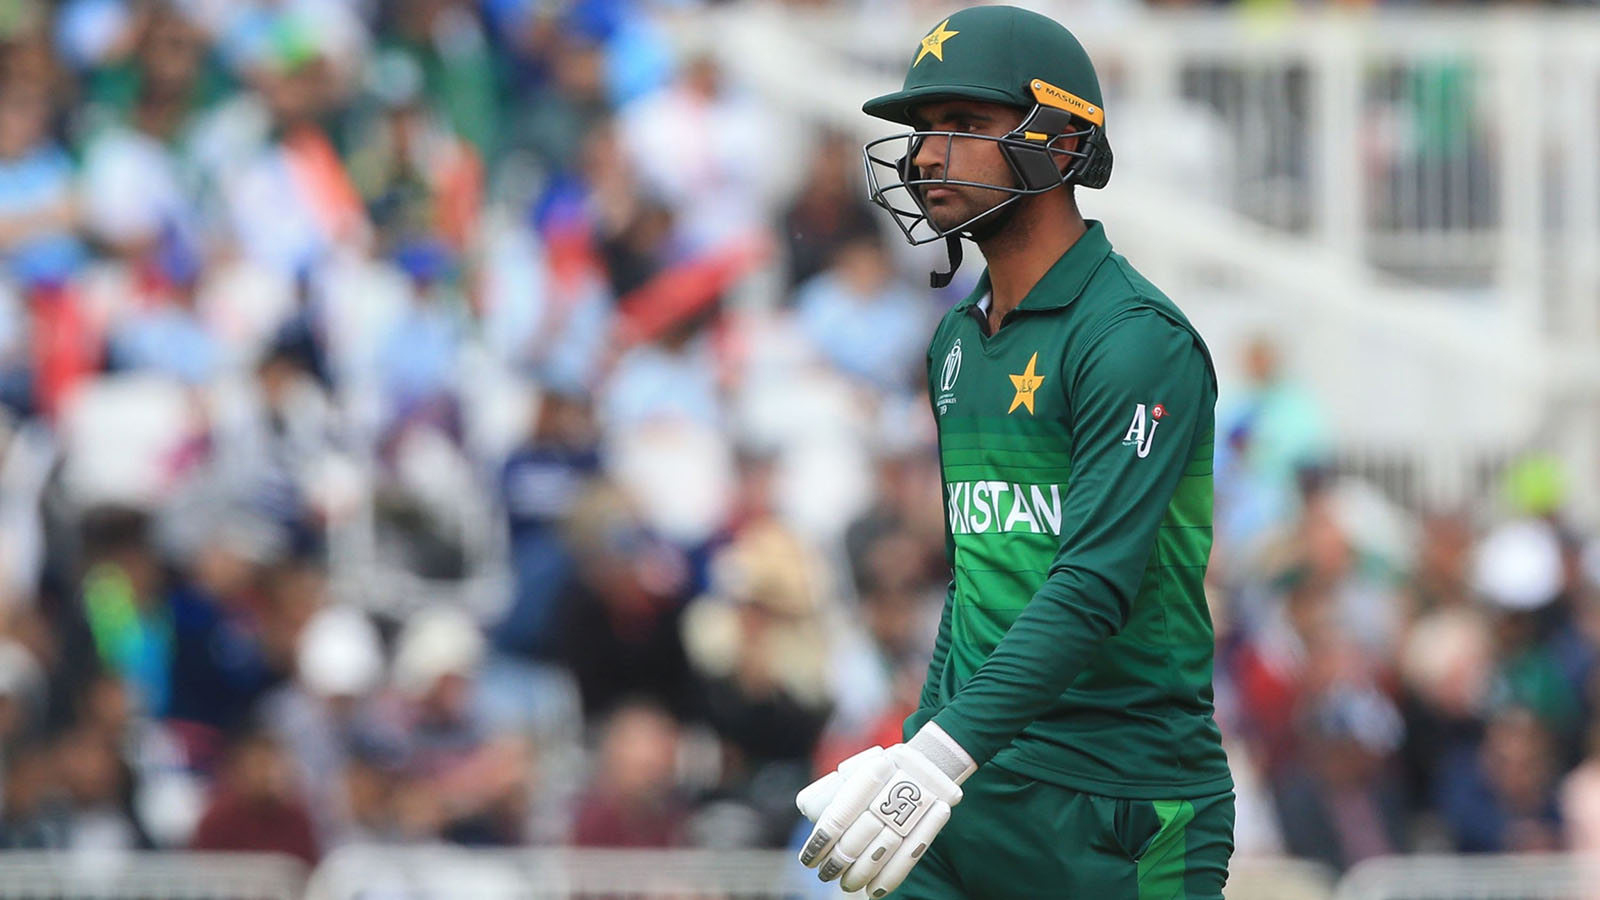 2019: The year of blunders in Pakistan cricket